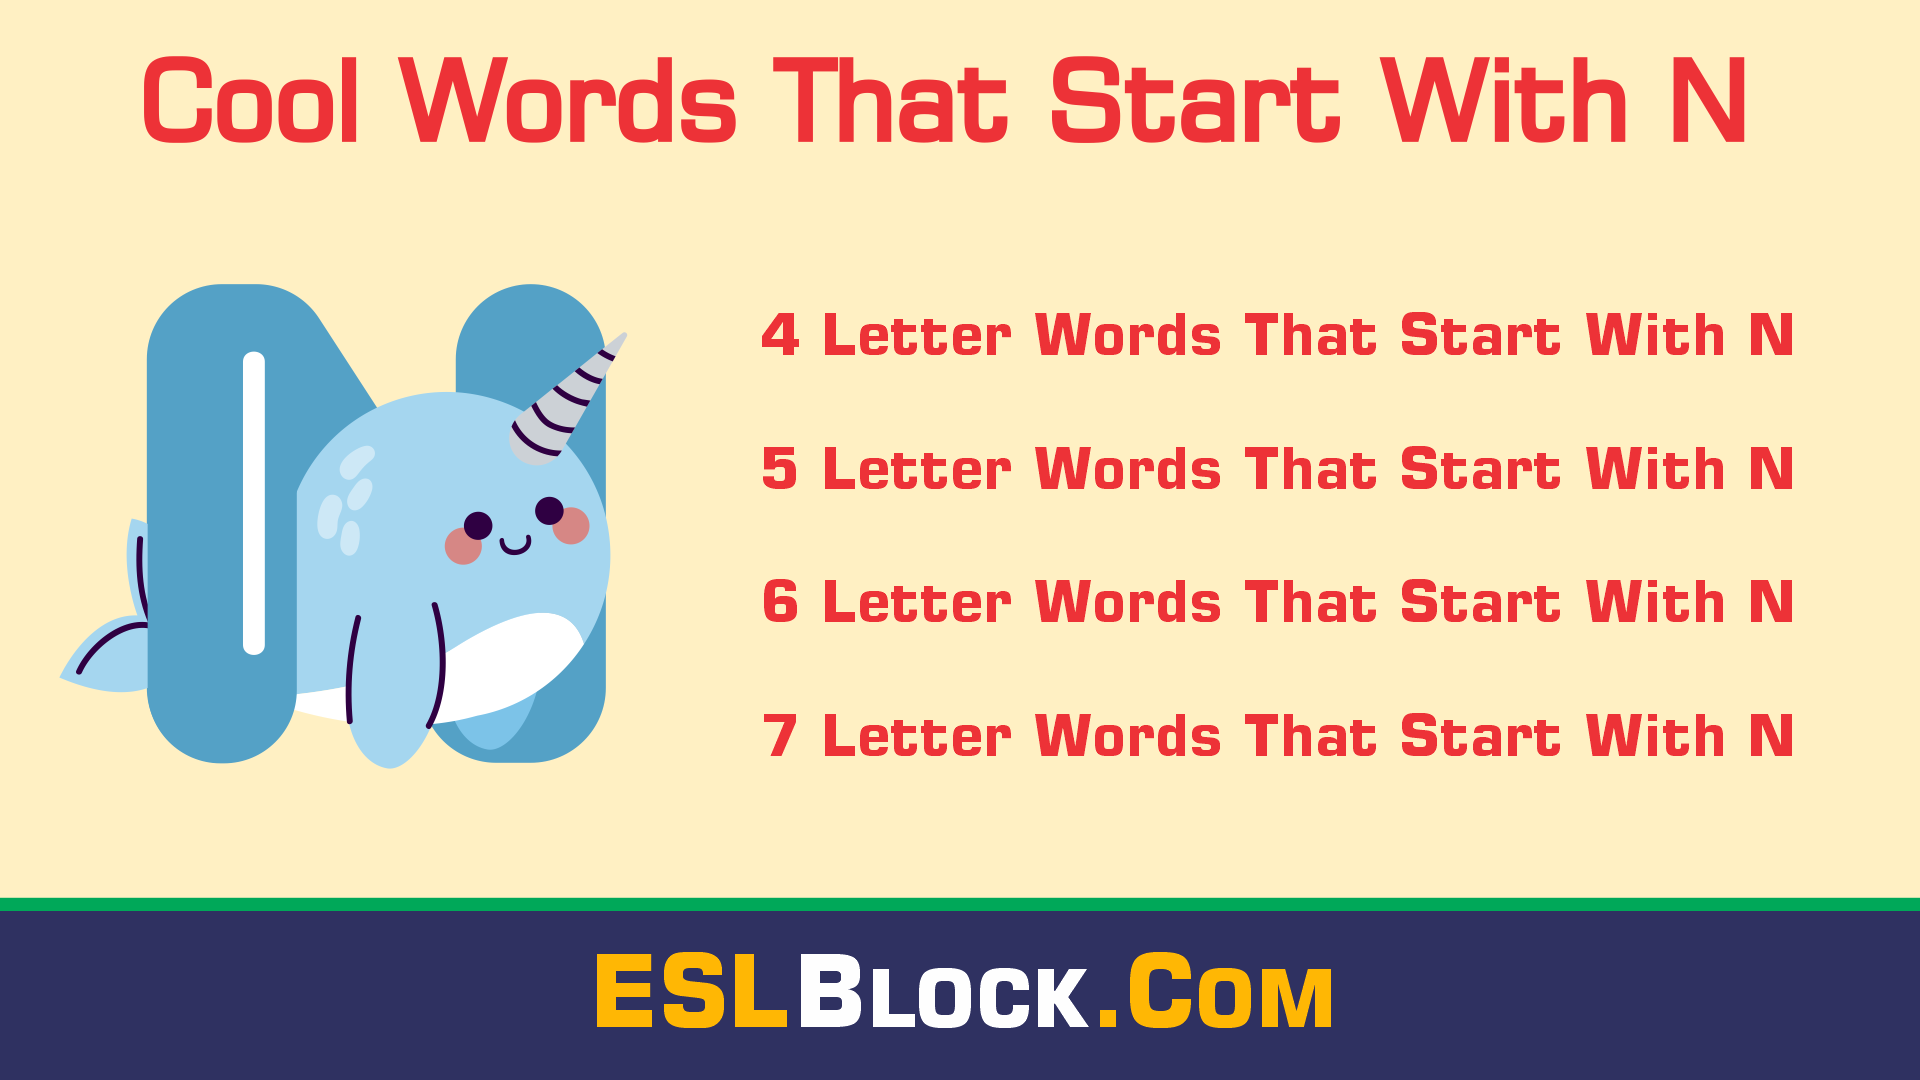 4 Letter Words, 4 Letter Words That Start With N, 5 Letter Words, 5 Letter Words That Start With N, 6 Letter Words, 6 Letter Words That Start With N, 7 Letter Words, 7 Letter Words That Start With N, Awesome Cool Words, Christmas Words That Start With N, Cool Words, Describing Words That Start With N, Descriptive Words That Start With N, English Words, Five Letter Words Starting with N, Good Words That Start With N, N Words, Nice Words That Start With N, Positive Words That Start With N, Unique Words, Word Dictionary, Words That Start With N, Words That Start With N to Describe Someone